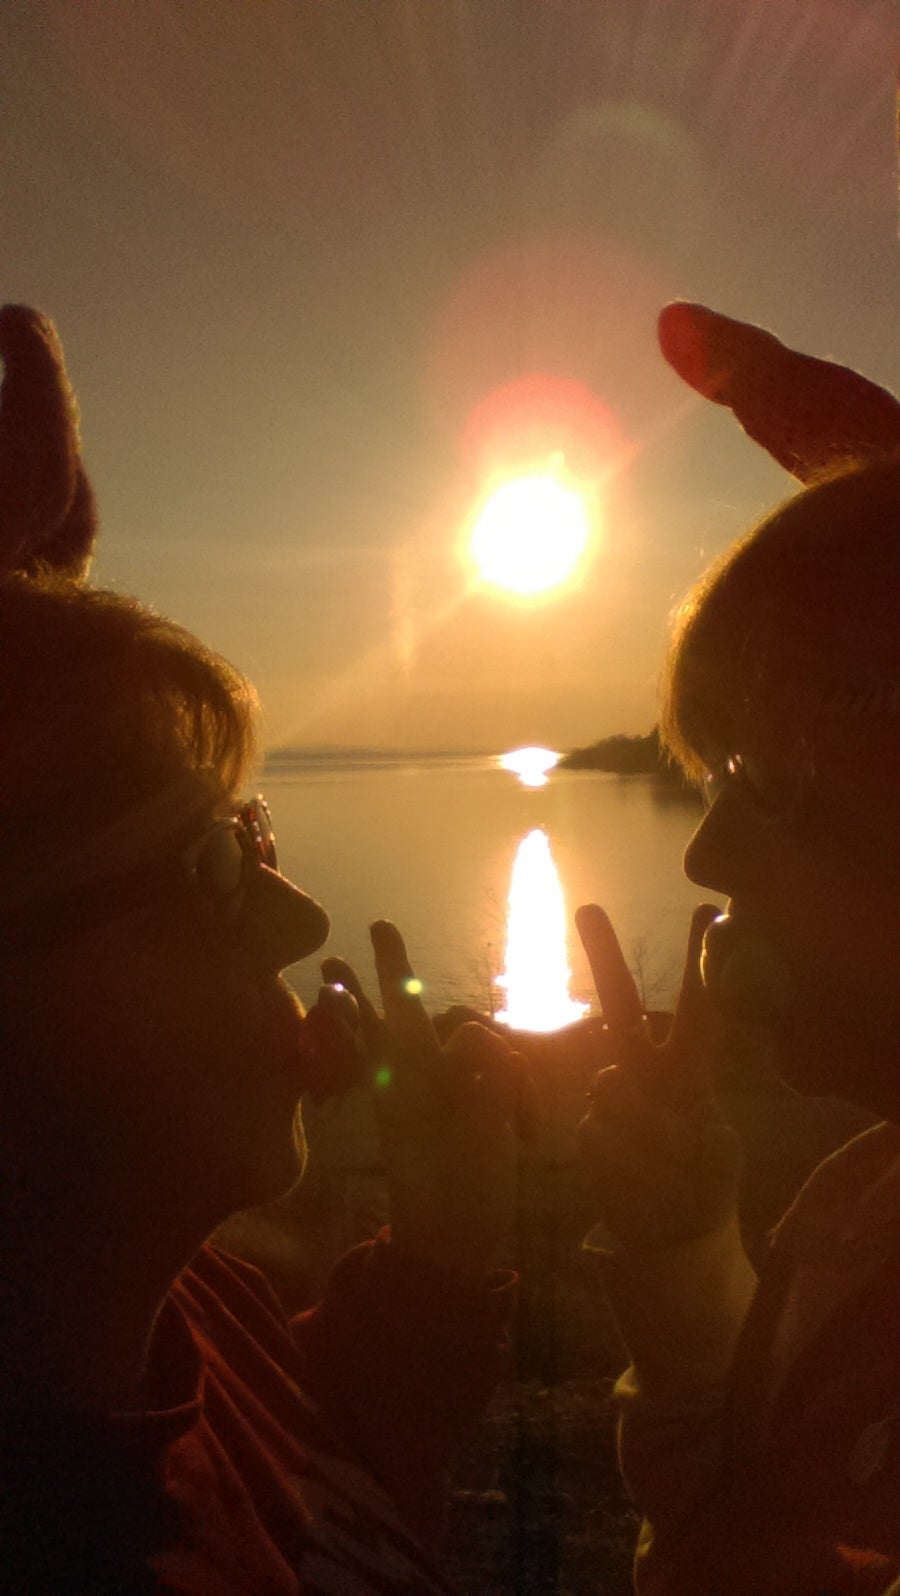 We like to have fun so here's our bunny ears and the sunset!